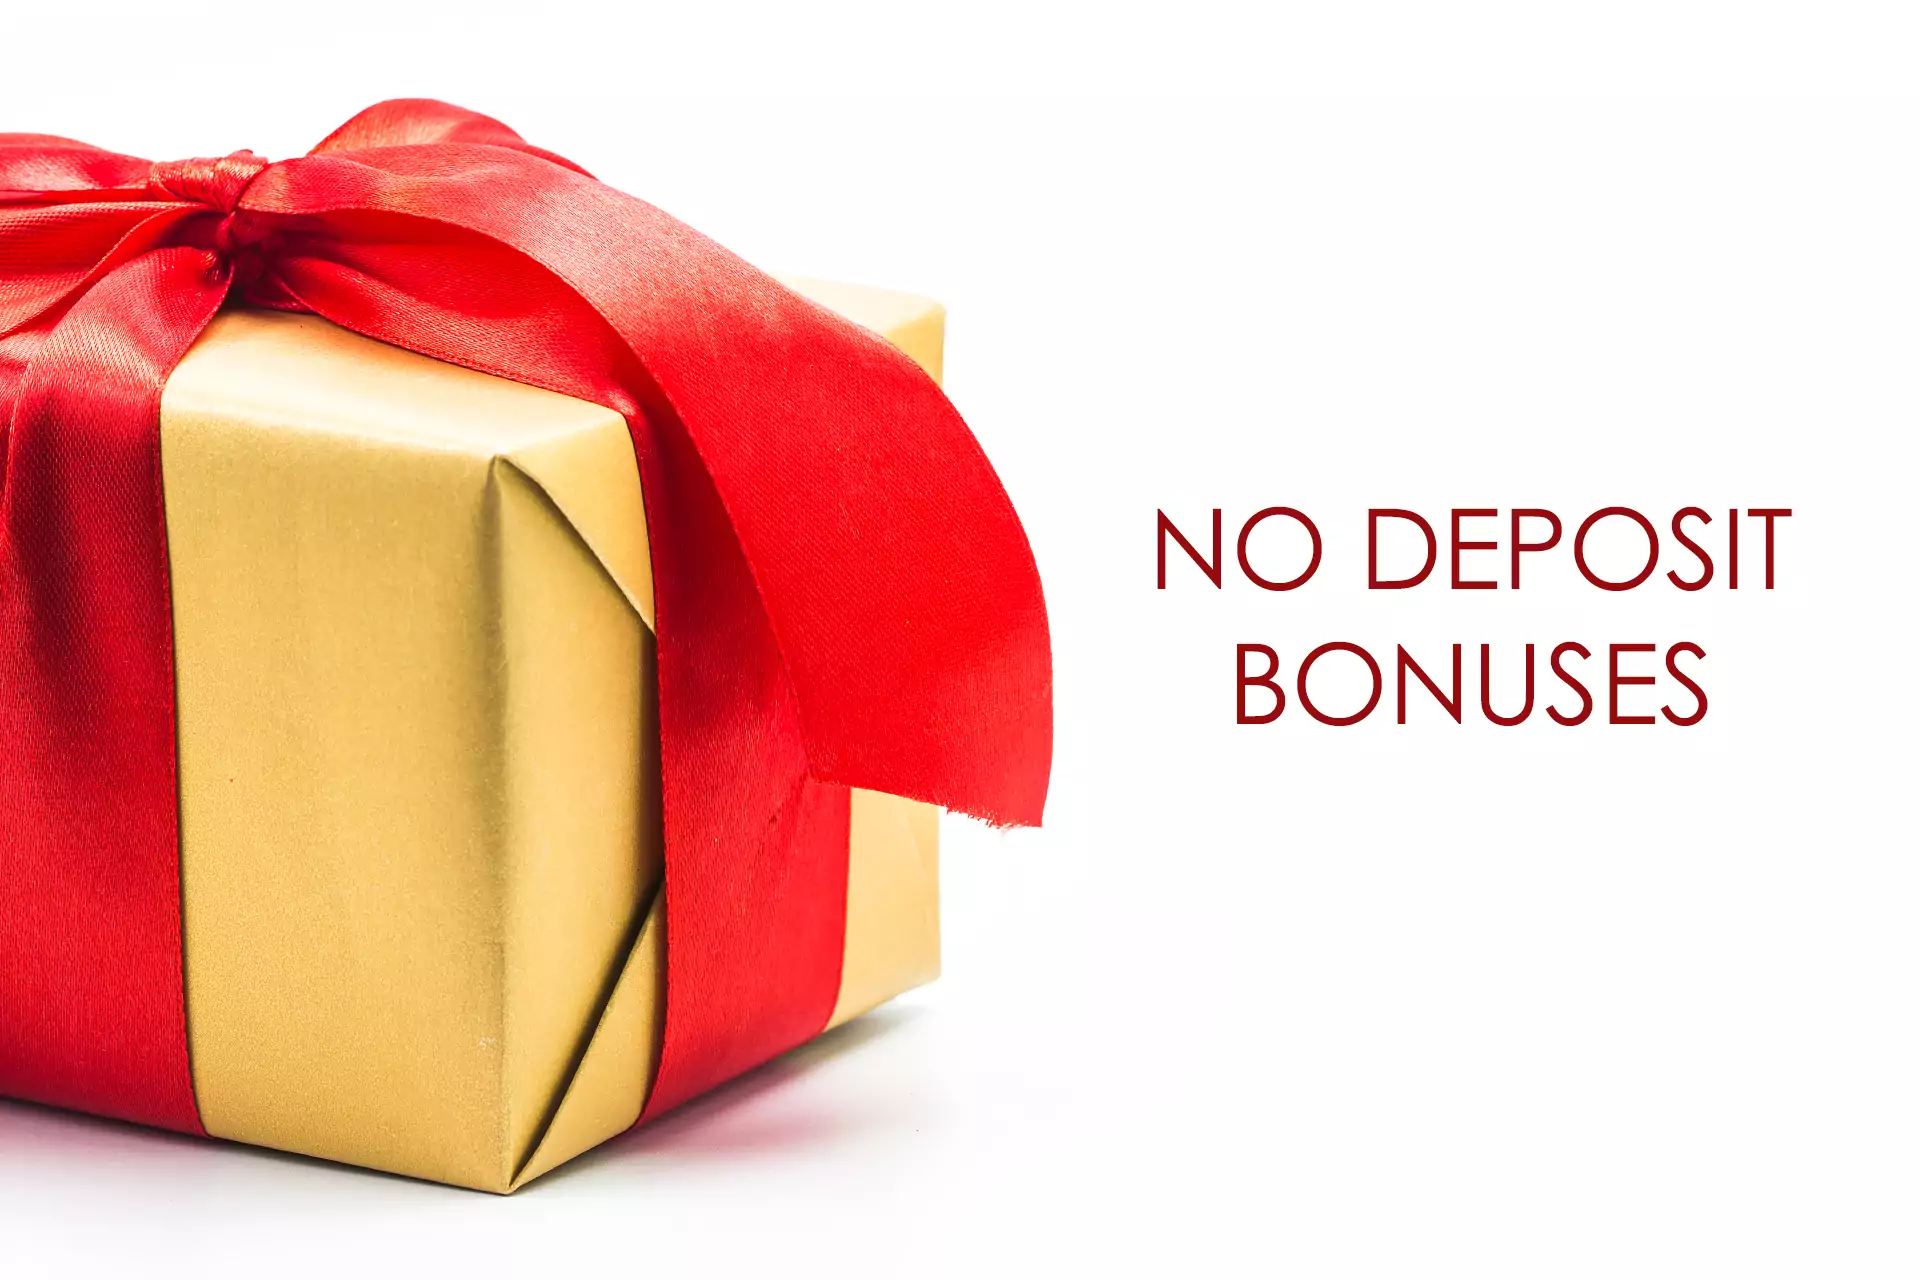 No deposit bonuses for cricket betting do not require a deposit.